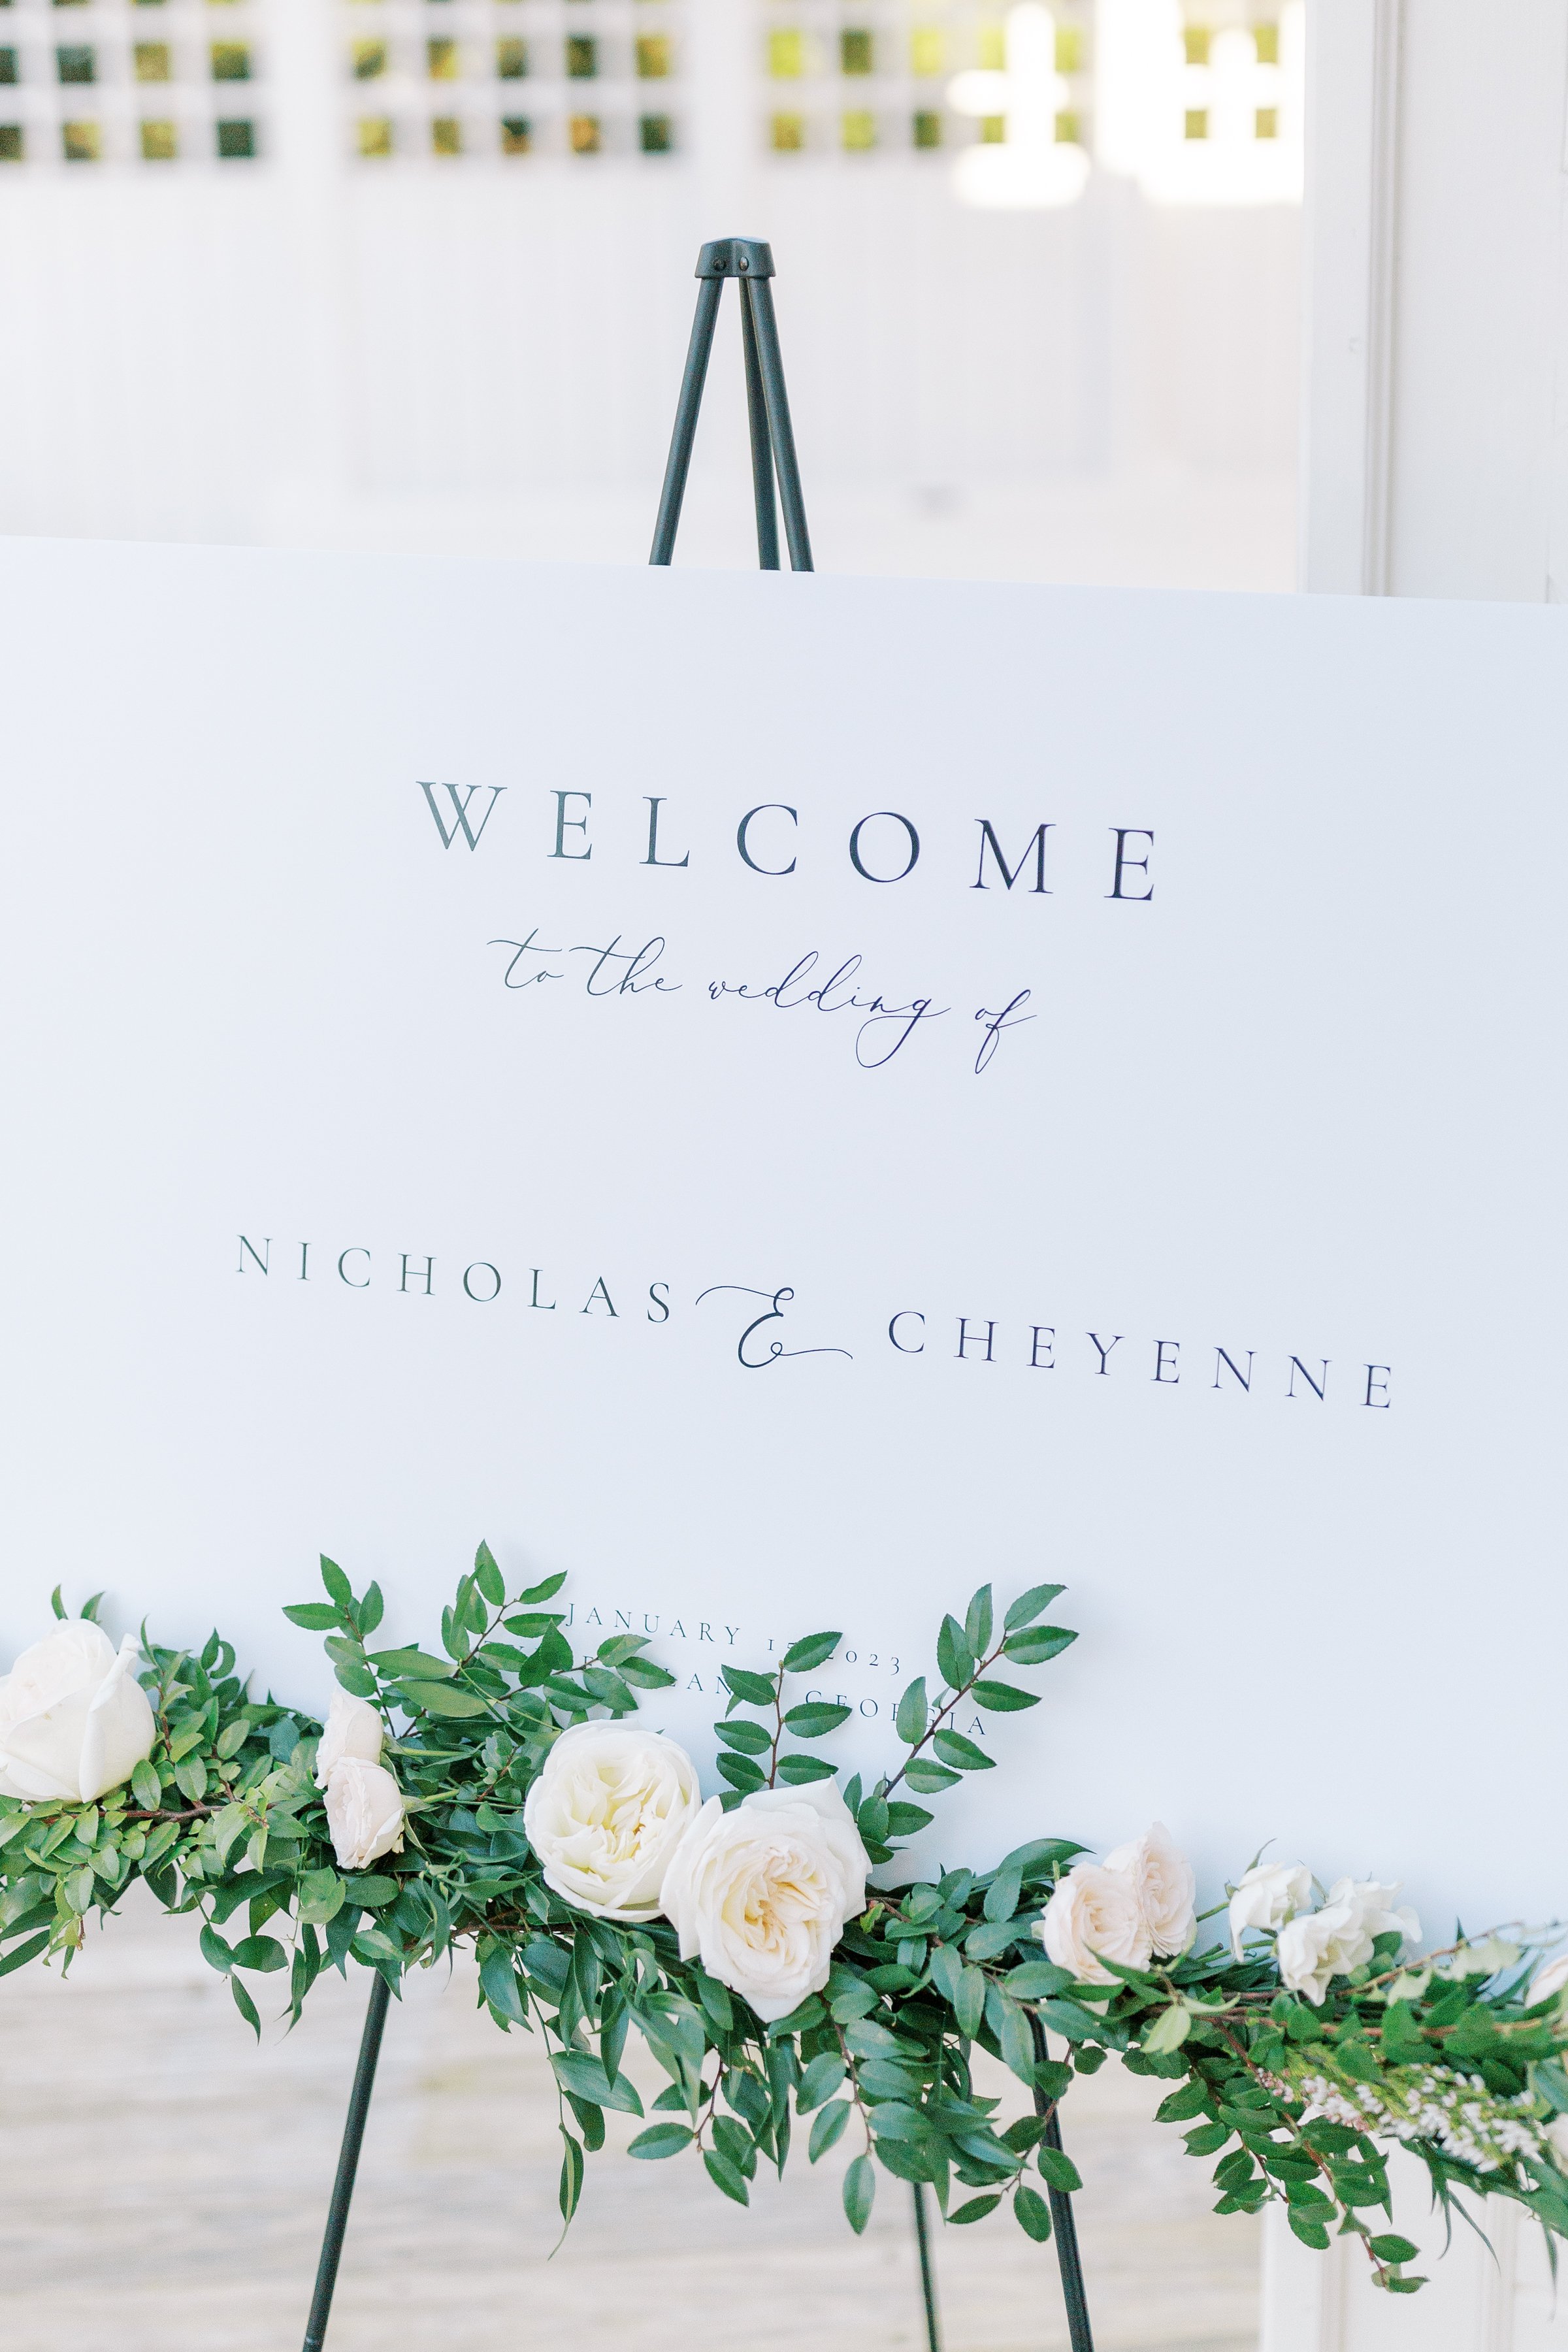 cheyenne-and-nicks-wedding-at-the-tybee-island-wedding-chapel-planned-by-savannah-wedding-planner-ivory-and-beau-with-sottero-and-midgley-gown-from-savannah-bridal-shop-and-wedding-florals-from-savannah-florist-8.jpg